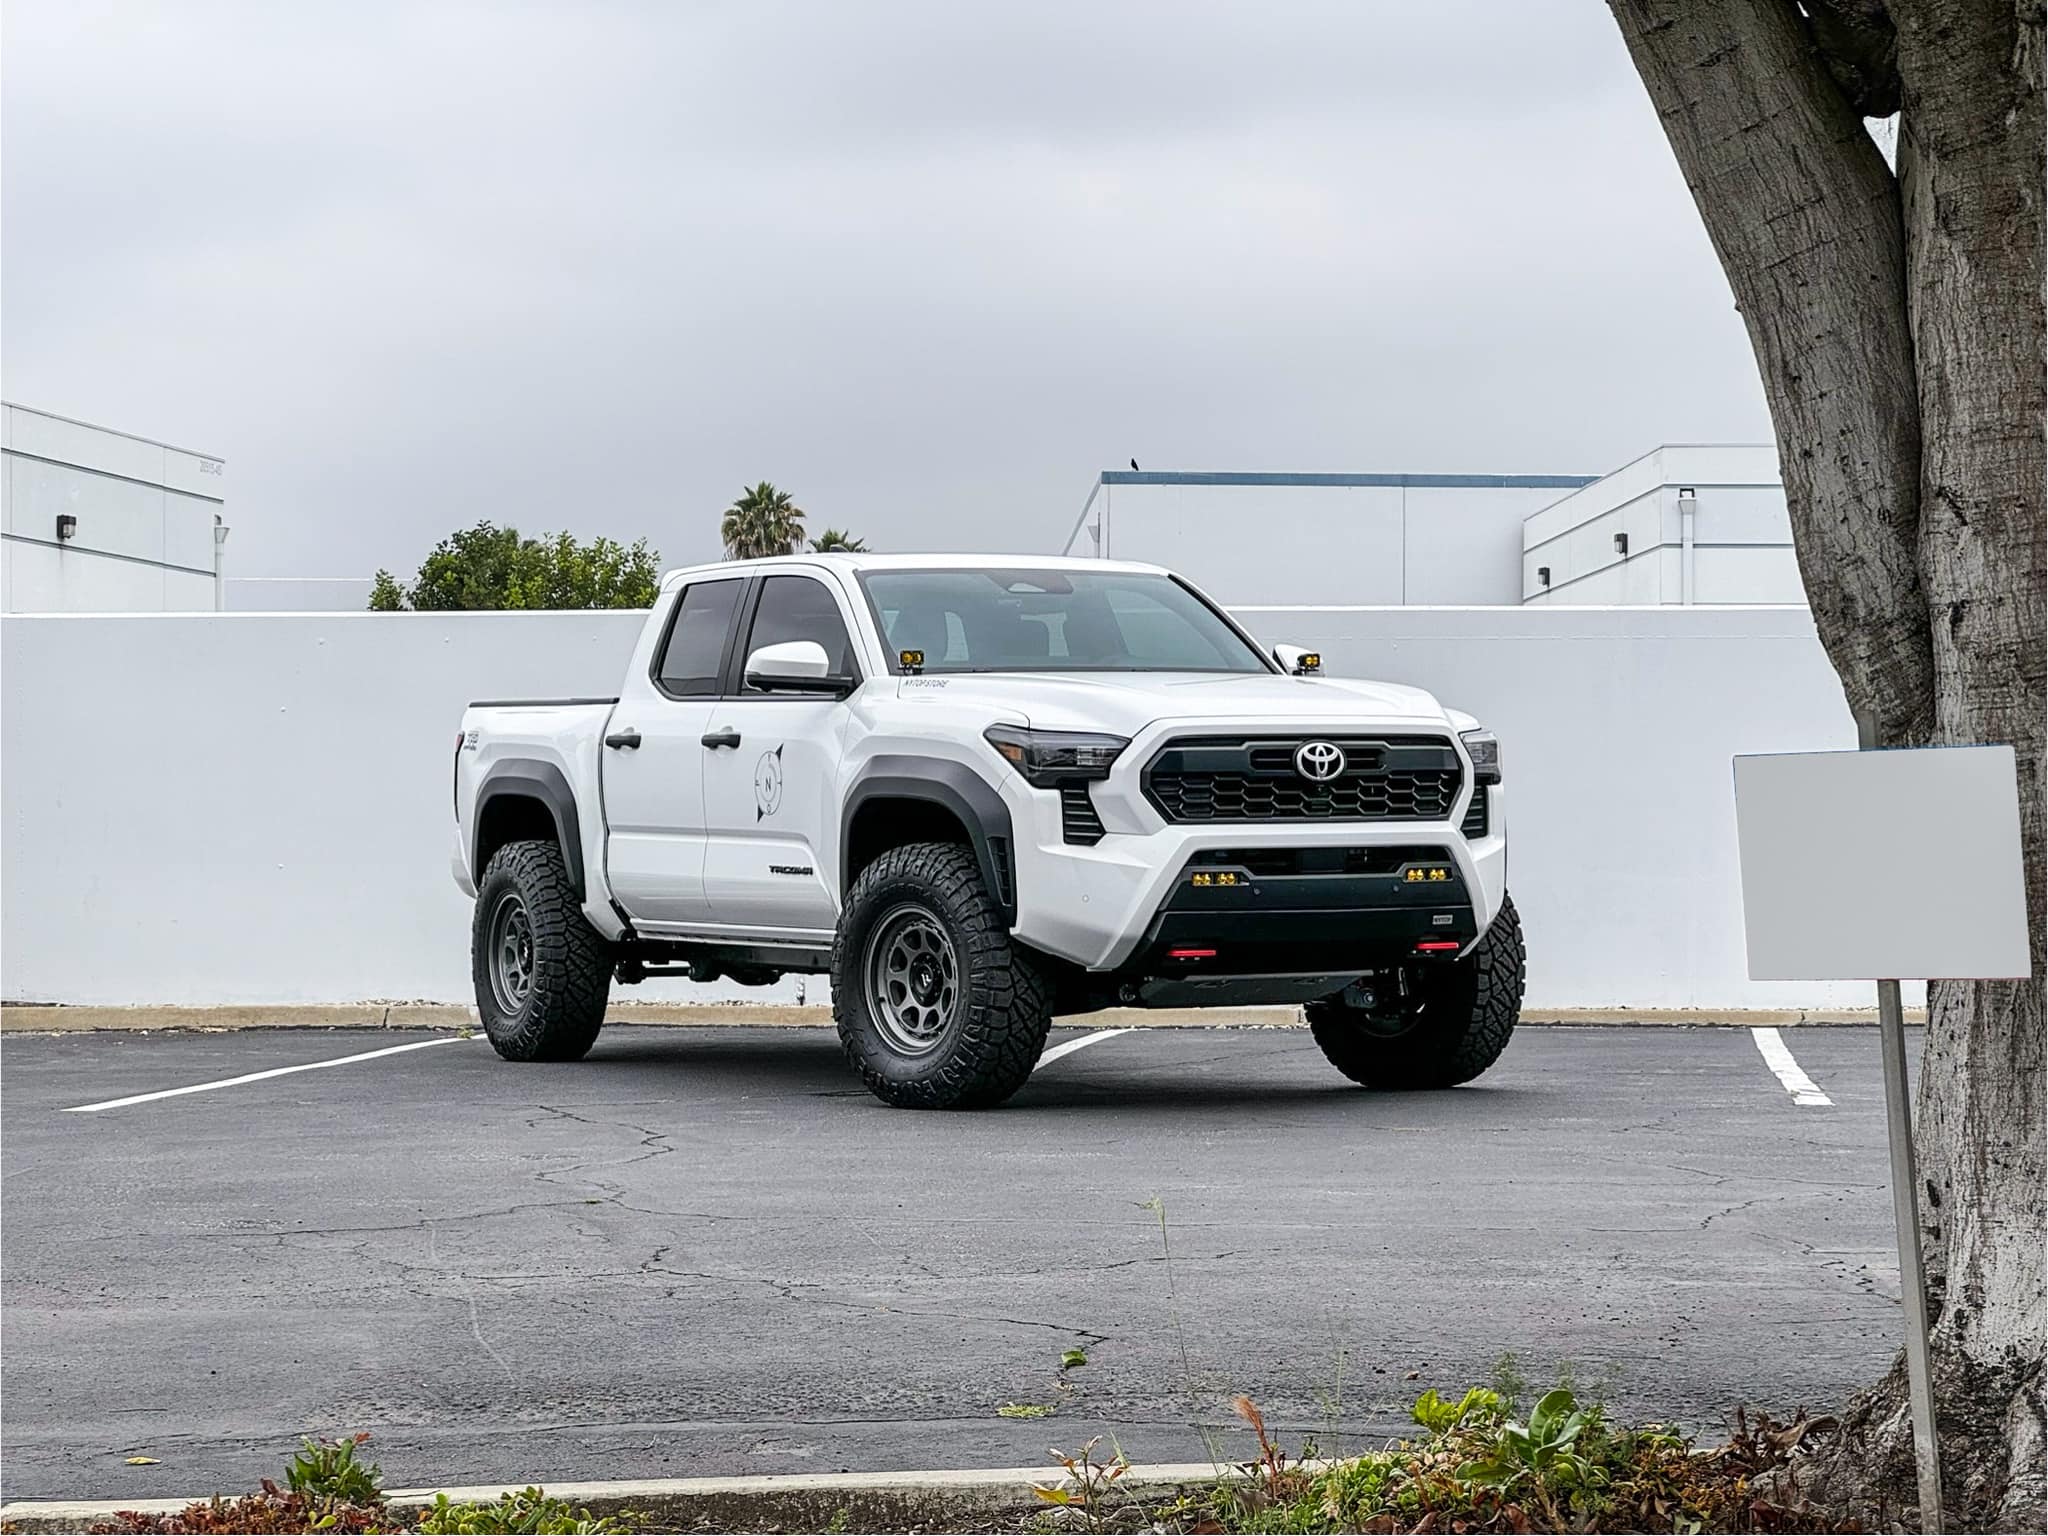 2024 Tacoma NYTOP's 2024 Tacoma build on Fittipaldi Offroad FT Series 17x8.5 0 offset wheels + Nitto Ridge Grappler 285/75/17 34" tires 444152240_7723482584432074_9016065358744676074_n (1)